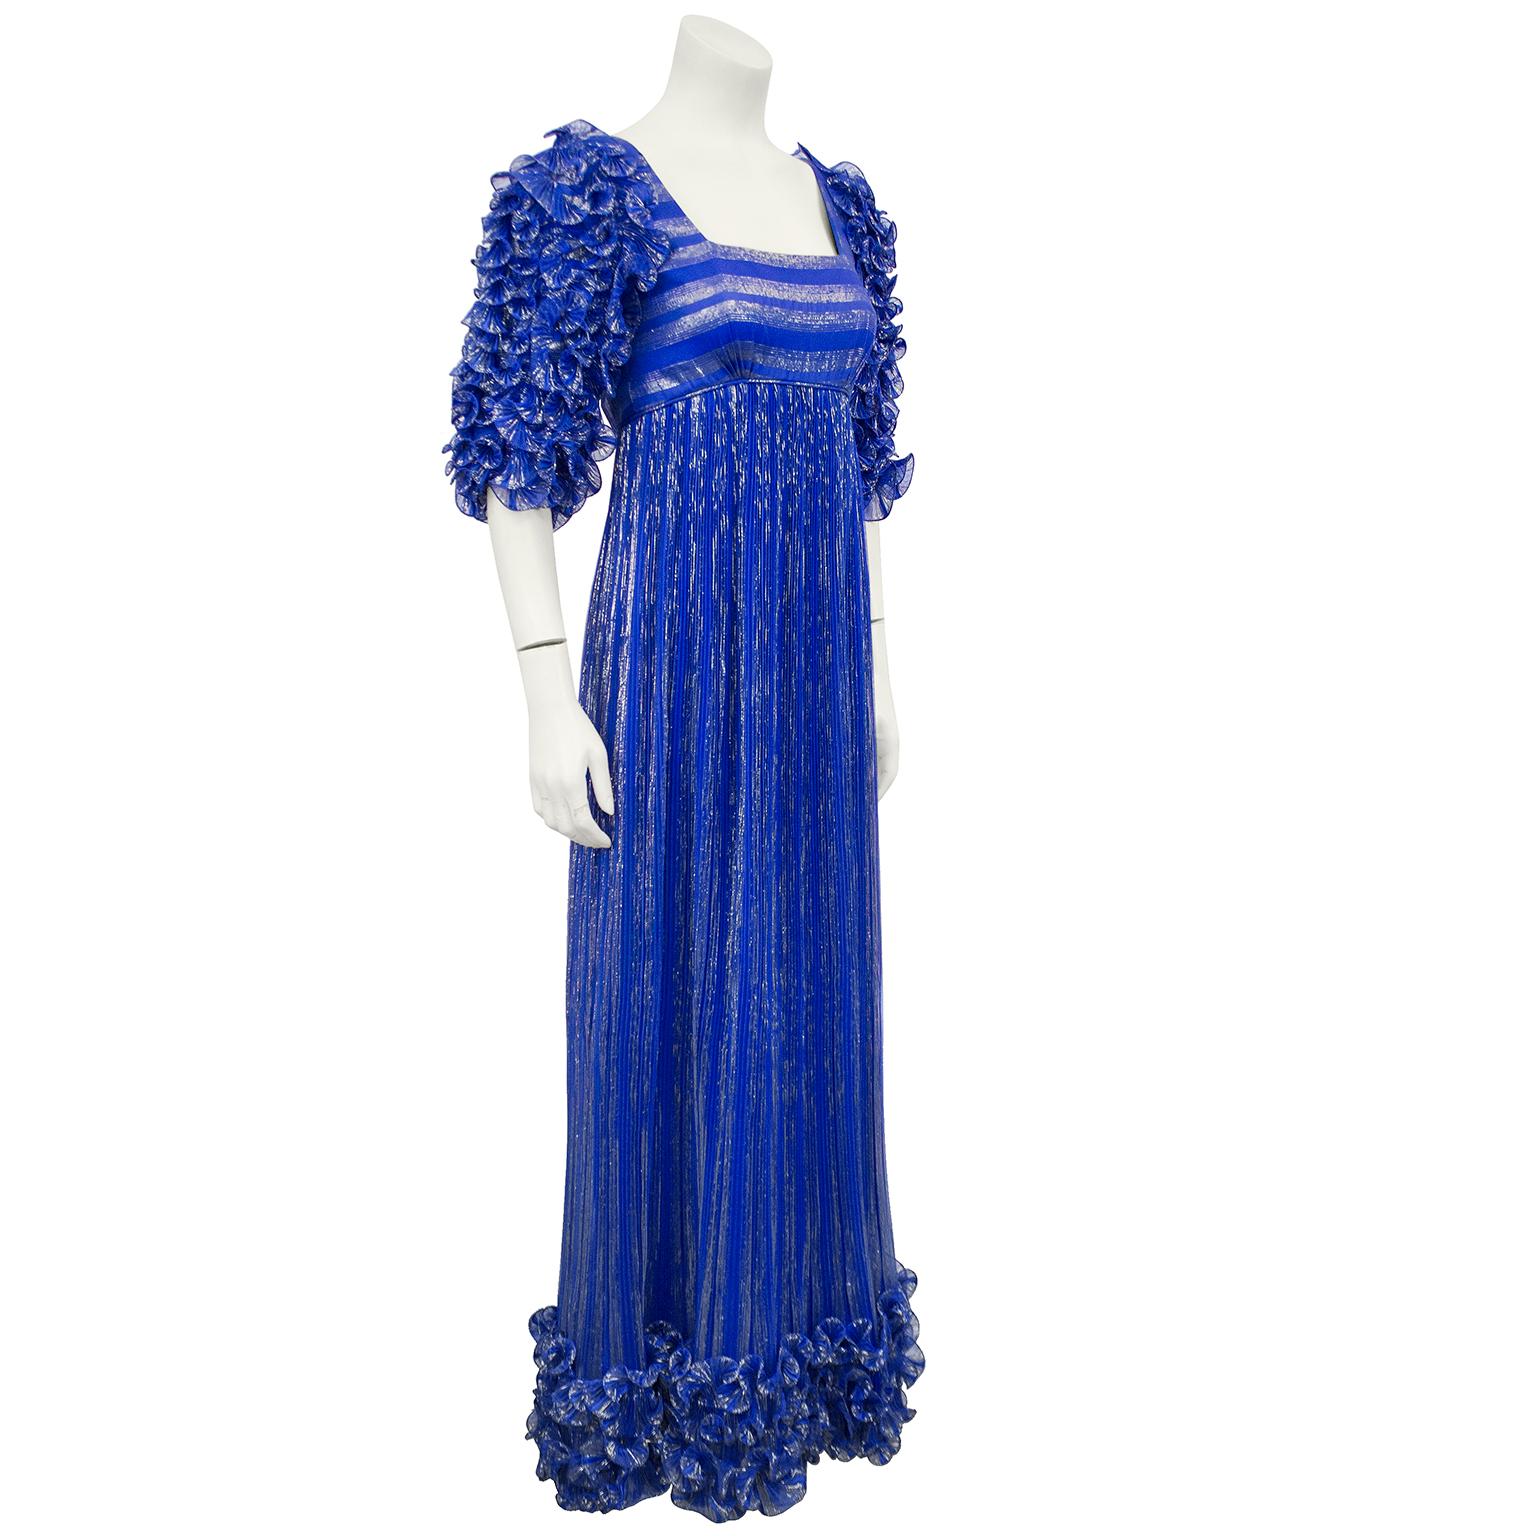 Dynasty era late 70's early 80's 's Alfred Bosand empress Josephine style gown. Plisé pleated origami style short sleeves with matching detail above the hemline. Square low cut neckline, column style skirt. Fully lined in royal blue. The royal blue